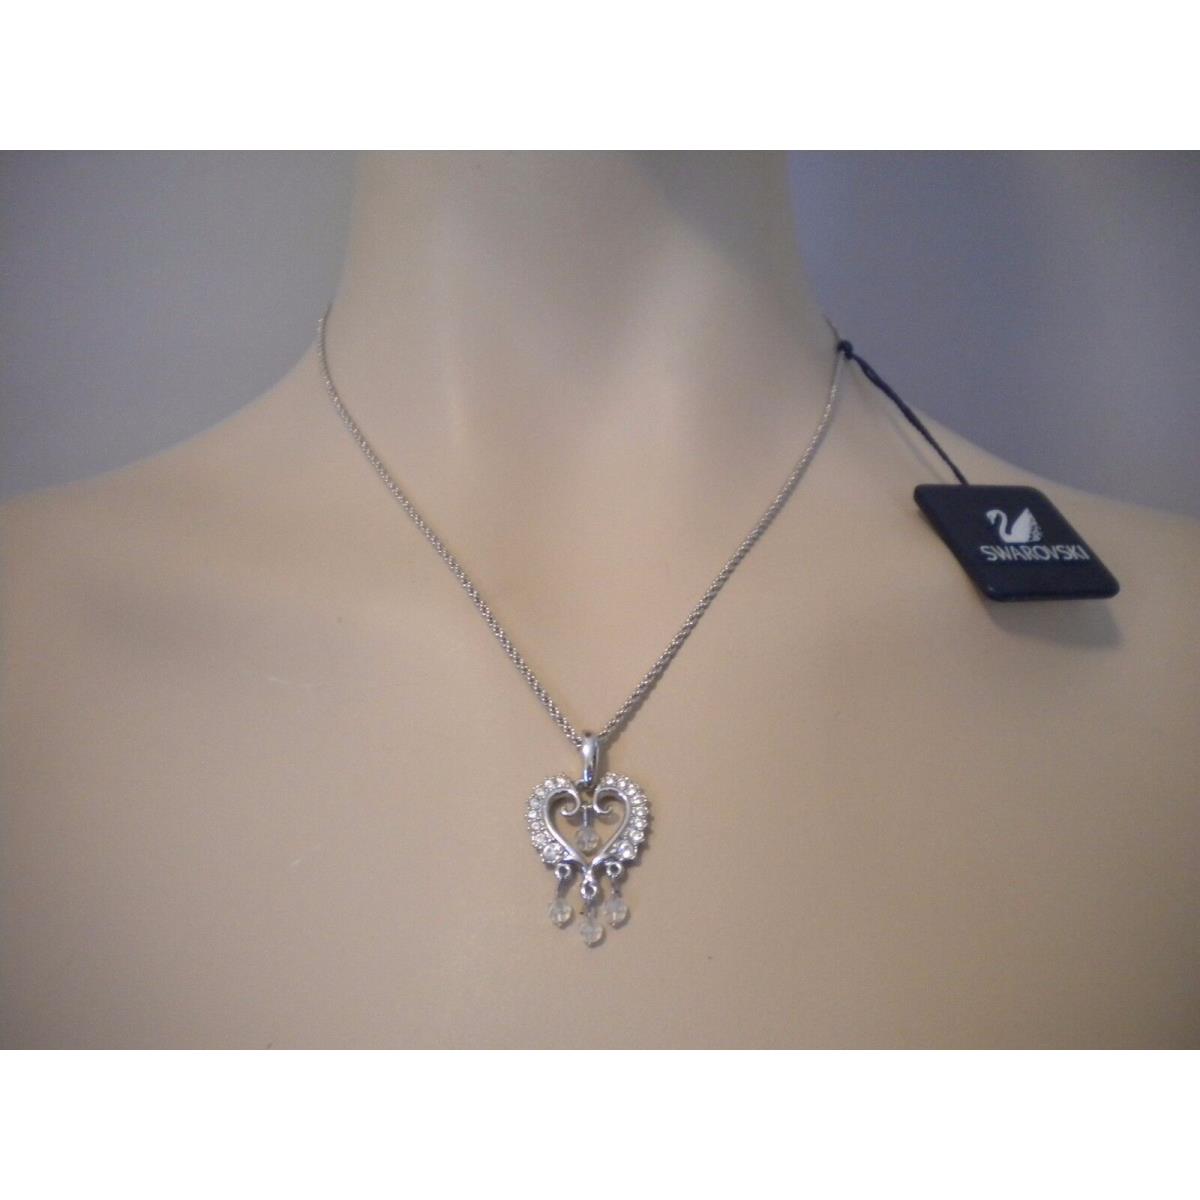 Swarovski Necklace Silver Tone Heart Charm 18 Adjustable Gift Party